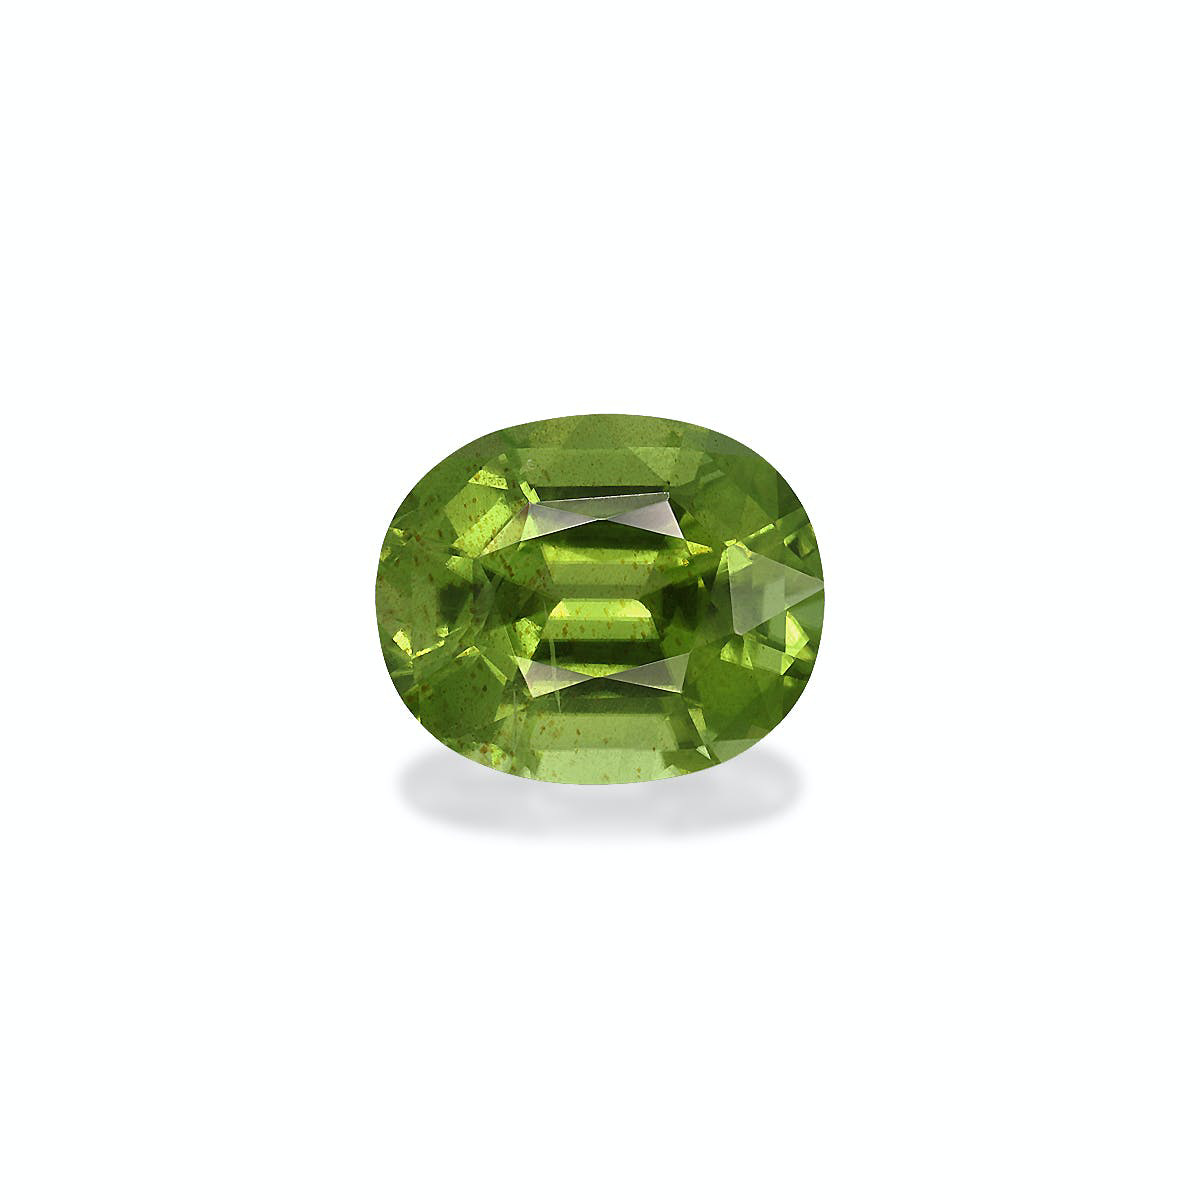 Picture of Pistachio Green Peridot 4.47ct - 11x9mm (PD0118)